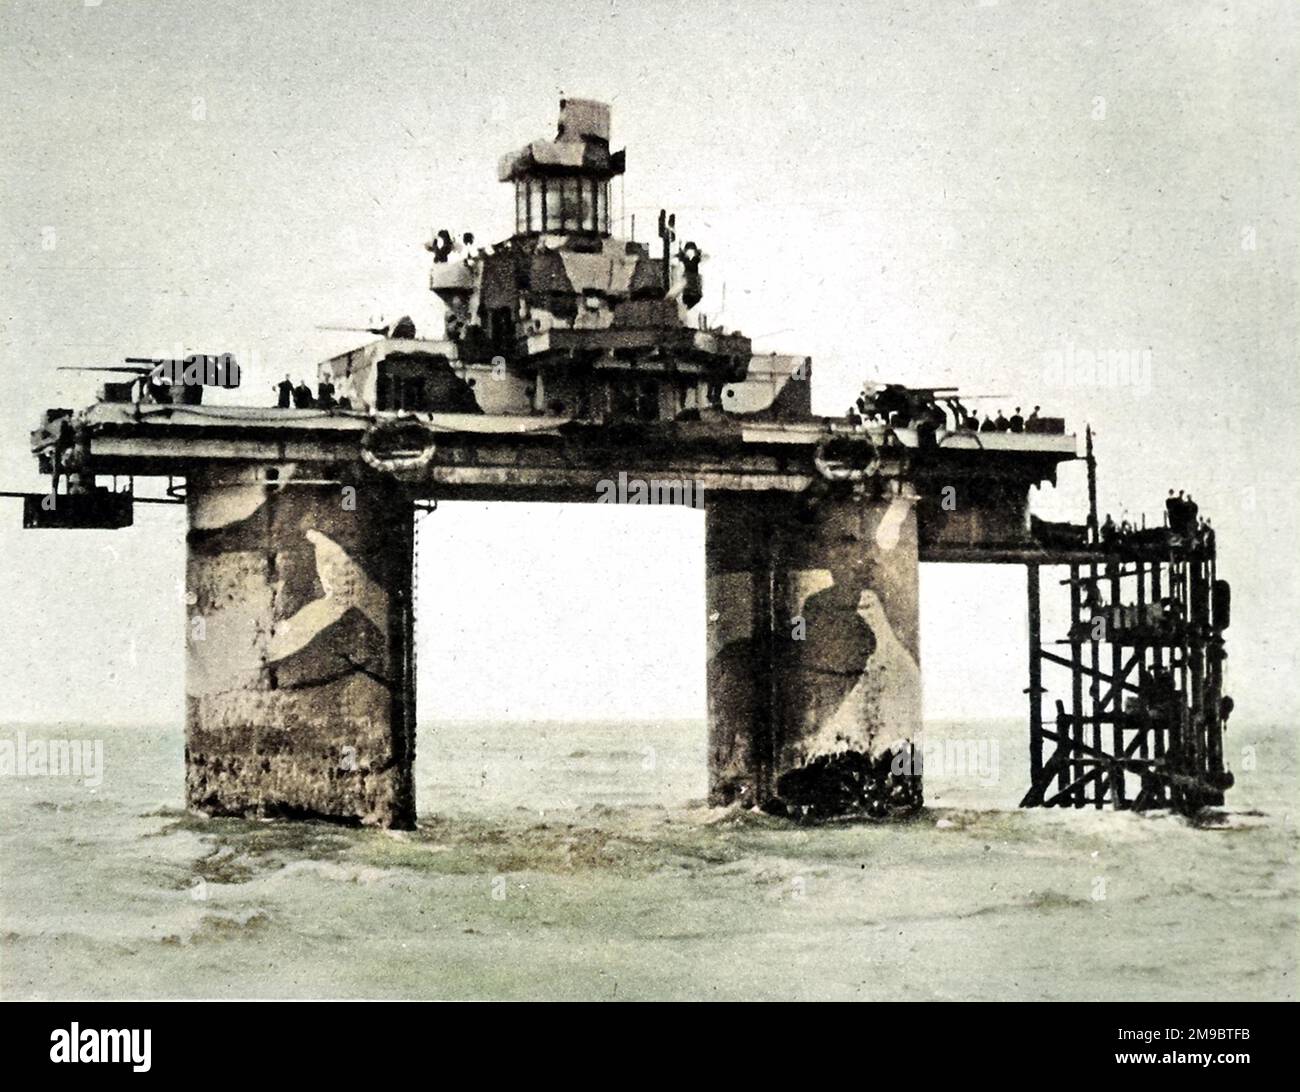 A Sea Fort, designed by G.A. Maunsell, situated in the Thames Estuary during the Second World War, 1944. This fort was in commission as a warship, being manned by Royal Marines under the command of RNVR officers. Stock Photo